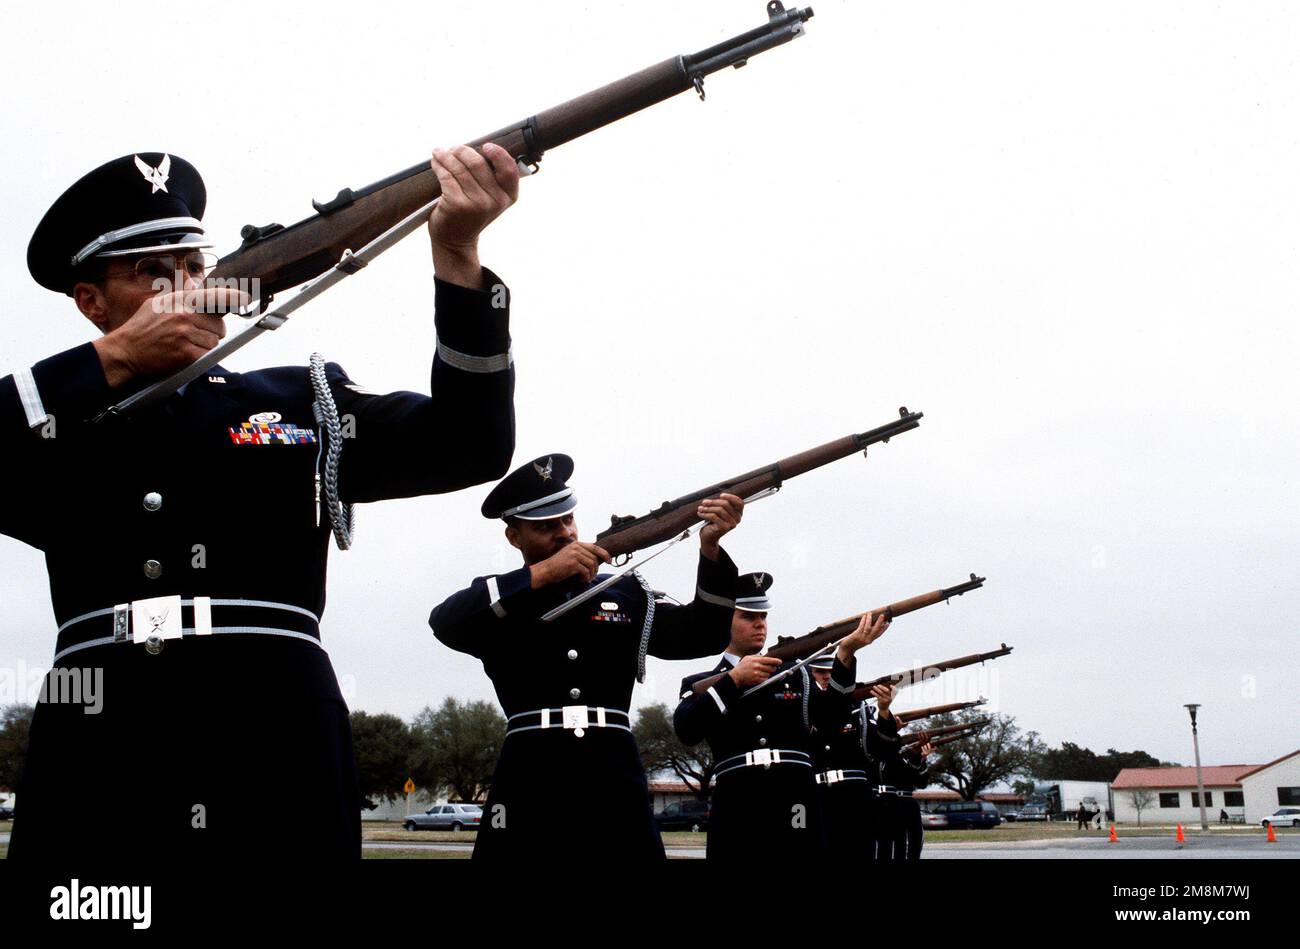 The Honor Guard aim their weapons. In FY 96 they participated in over 380 special events ranging from parades to sporting events including 231 funerals. The team is also an excellent recruiting tool in attracting the young people in the community to the Air Force. Base: Randolph Air Force Base State: Texas (TX) Country: United States Of America (USA) Stock Photo